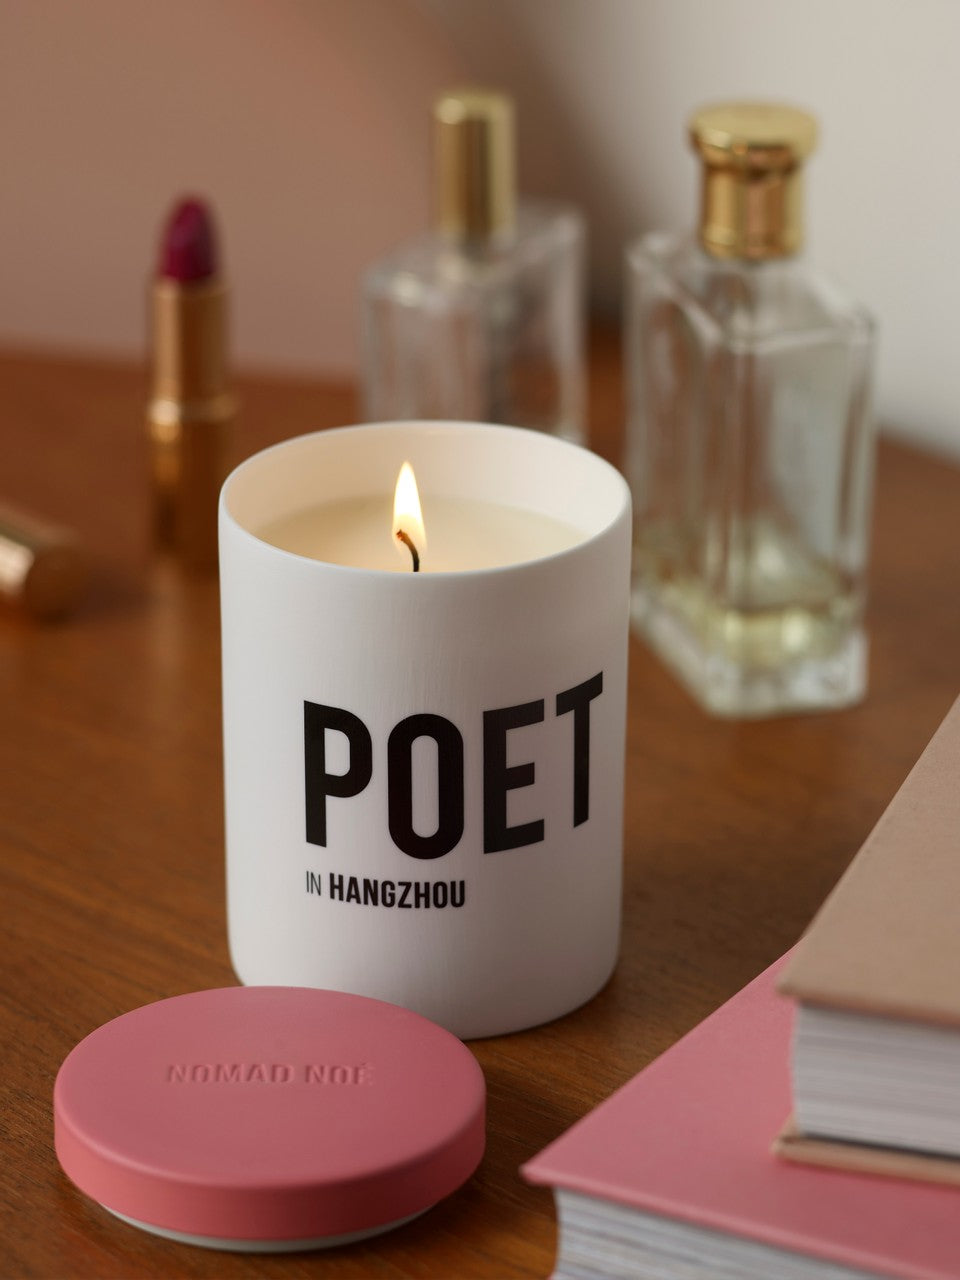 Poet luxury pink scented candle burning 